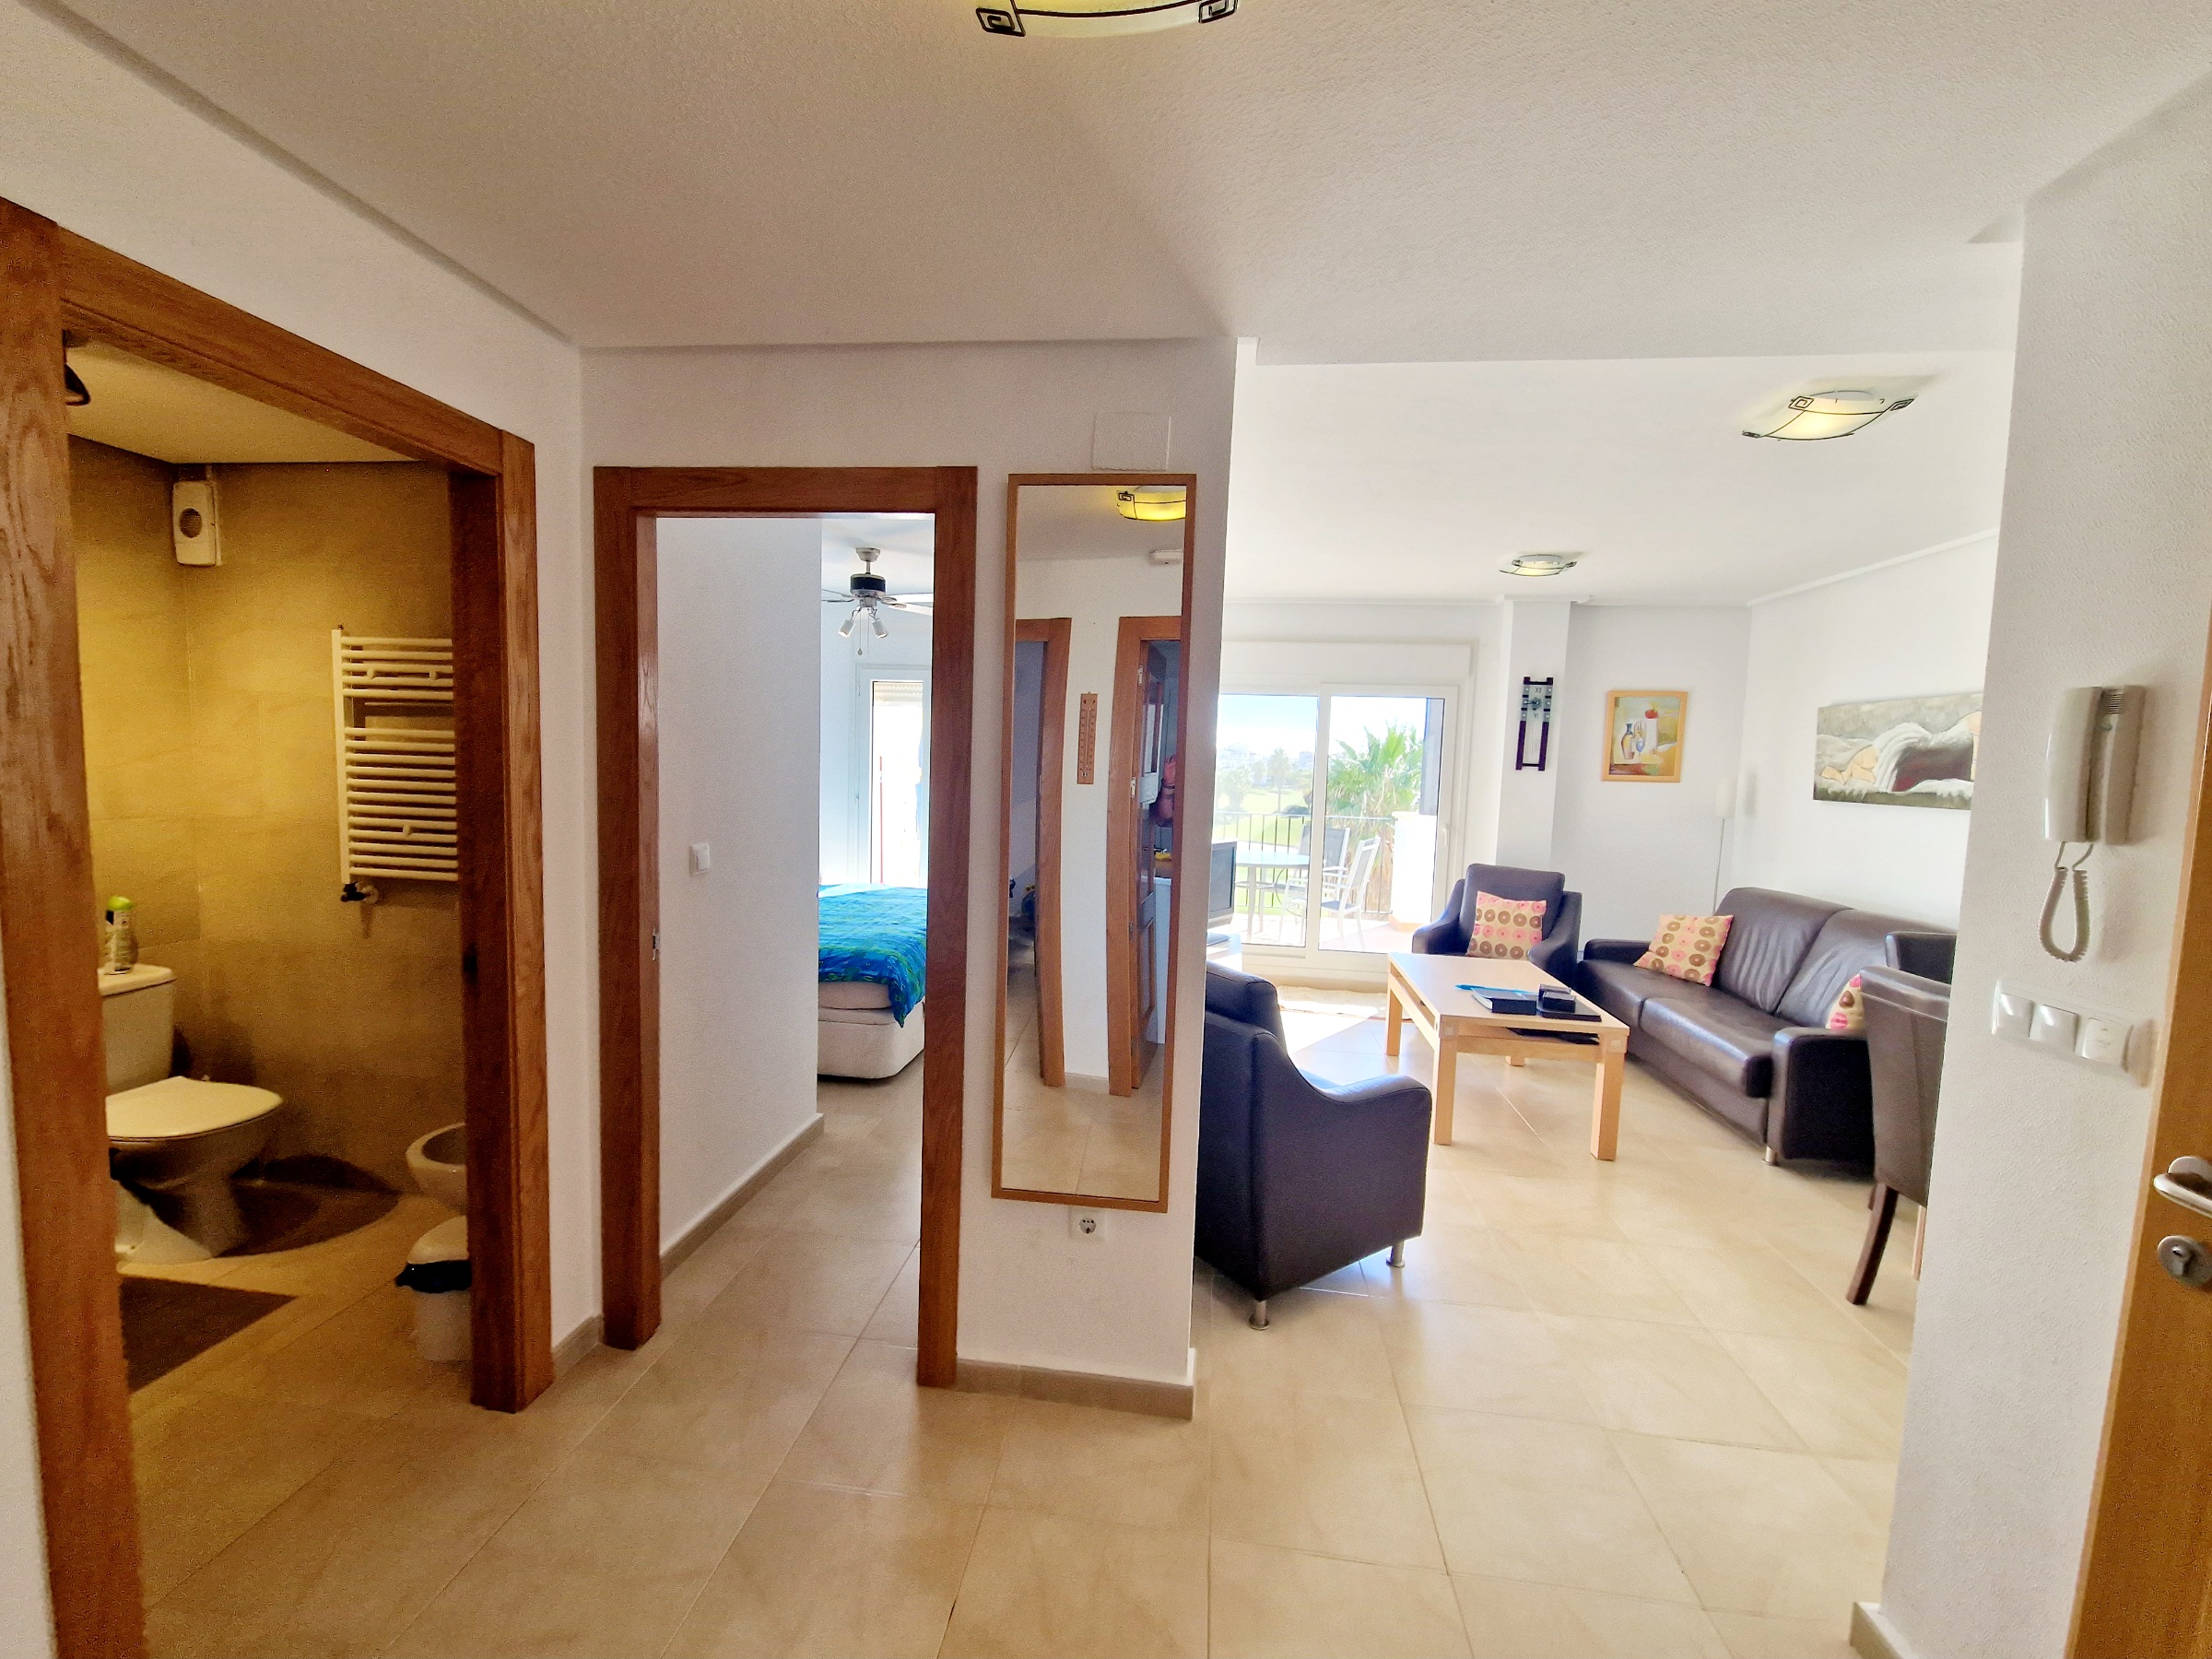 La Torre Golf Resort: 2 bed 1 bath apartment with amazing golf views for sale